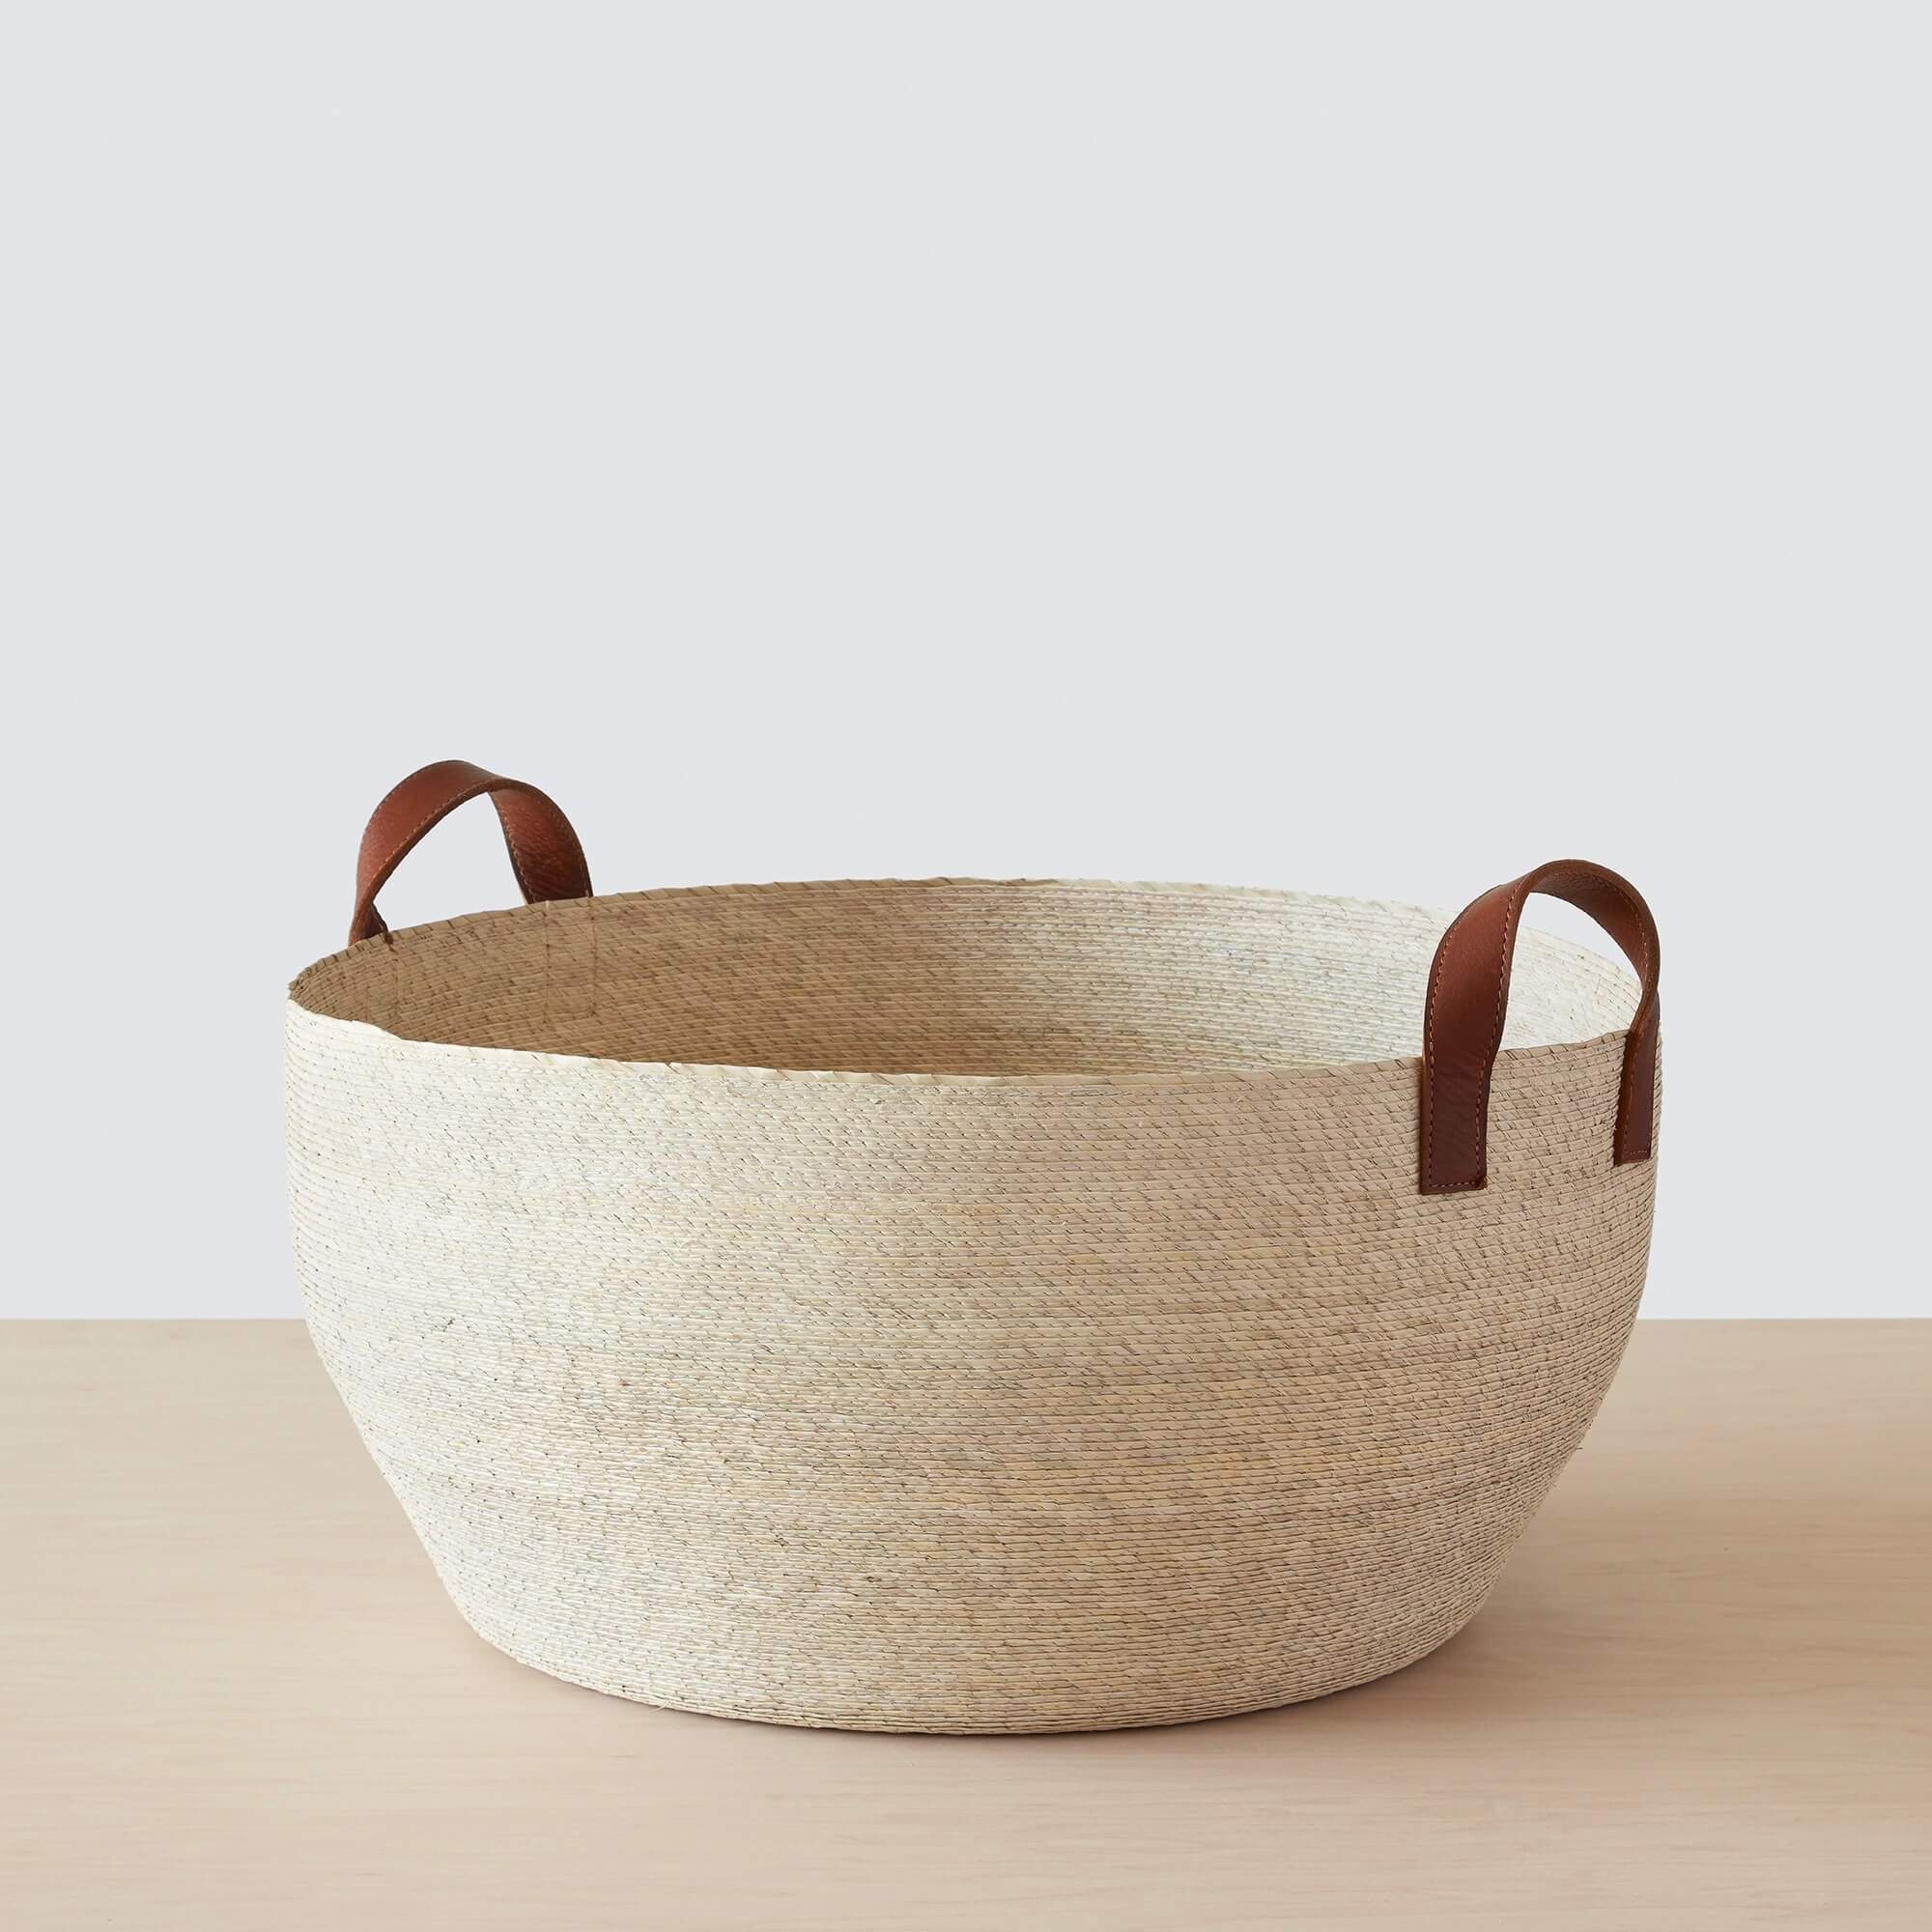 The Citizenry Mercado Floor Baskets | Large | Natural - Image 0